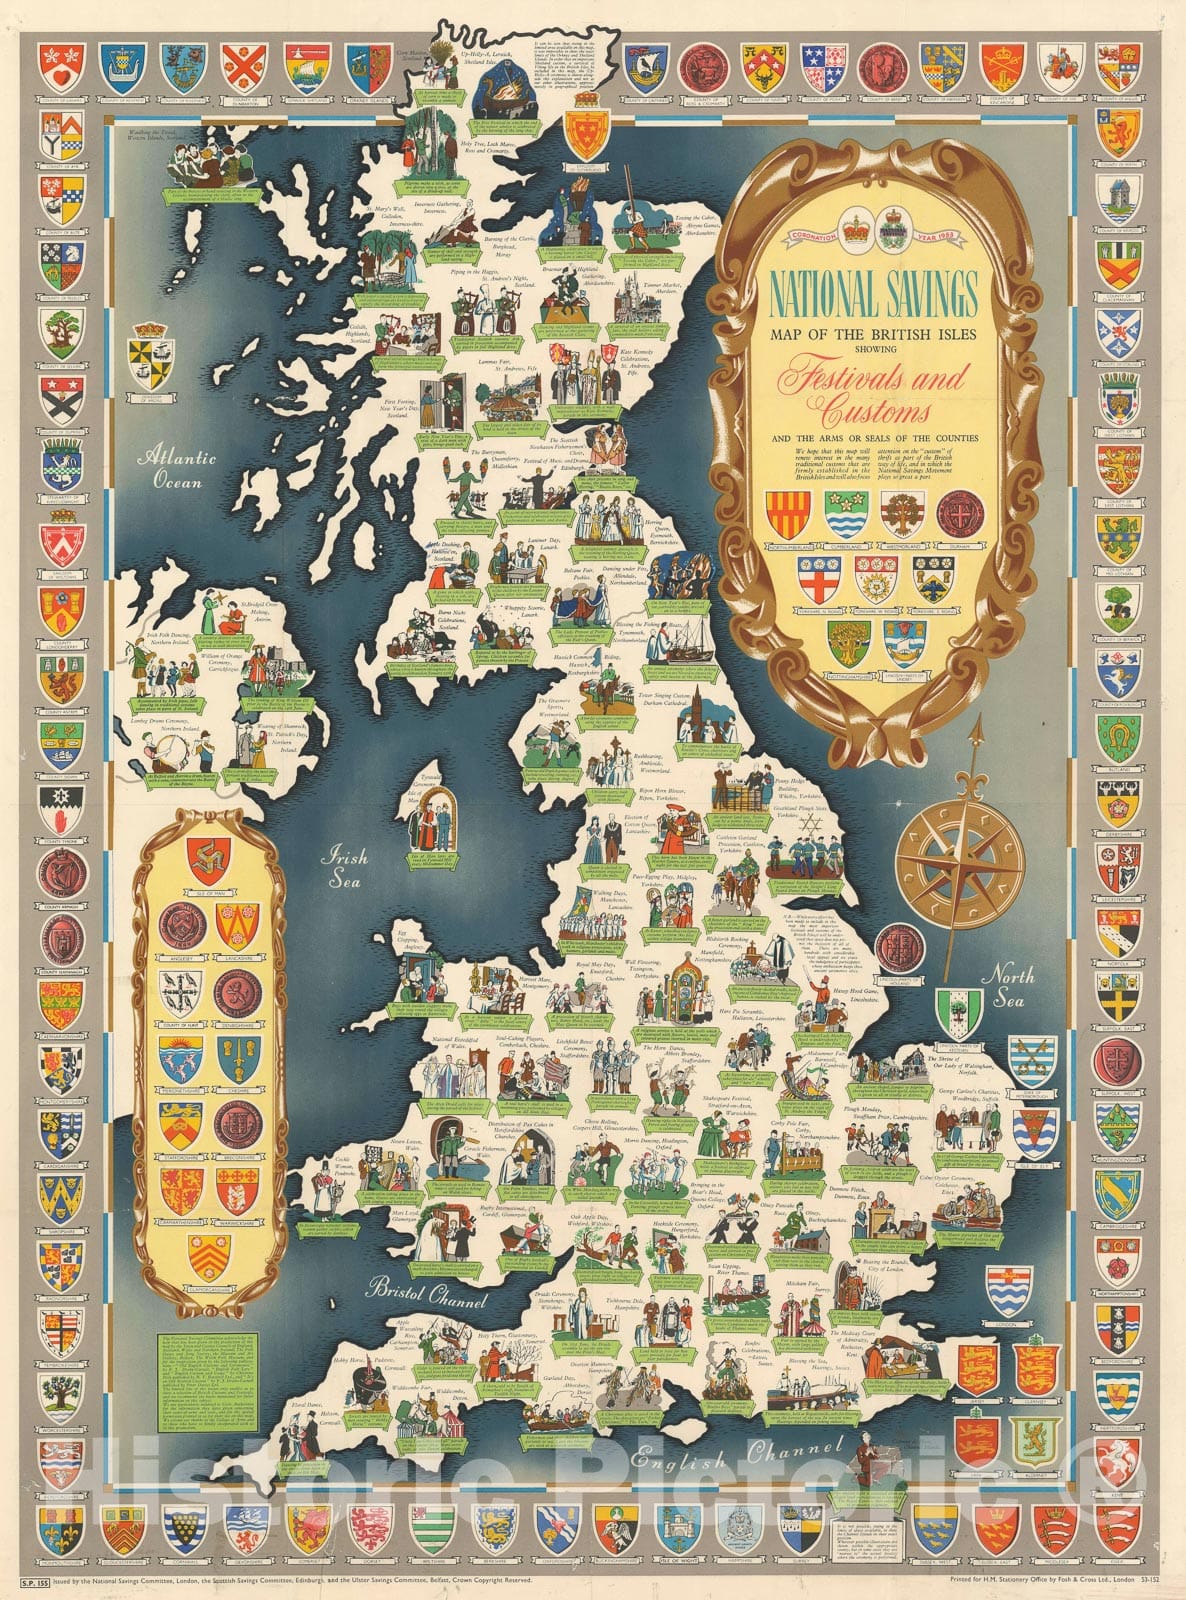 Historic Map : Pictorial Map of The British Isles Festivals and Customs, National Savings, 1953, Vintage Wall Art